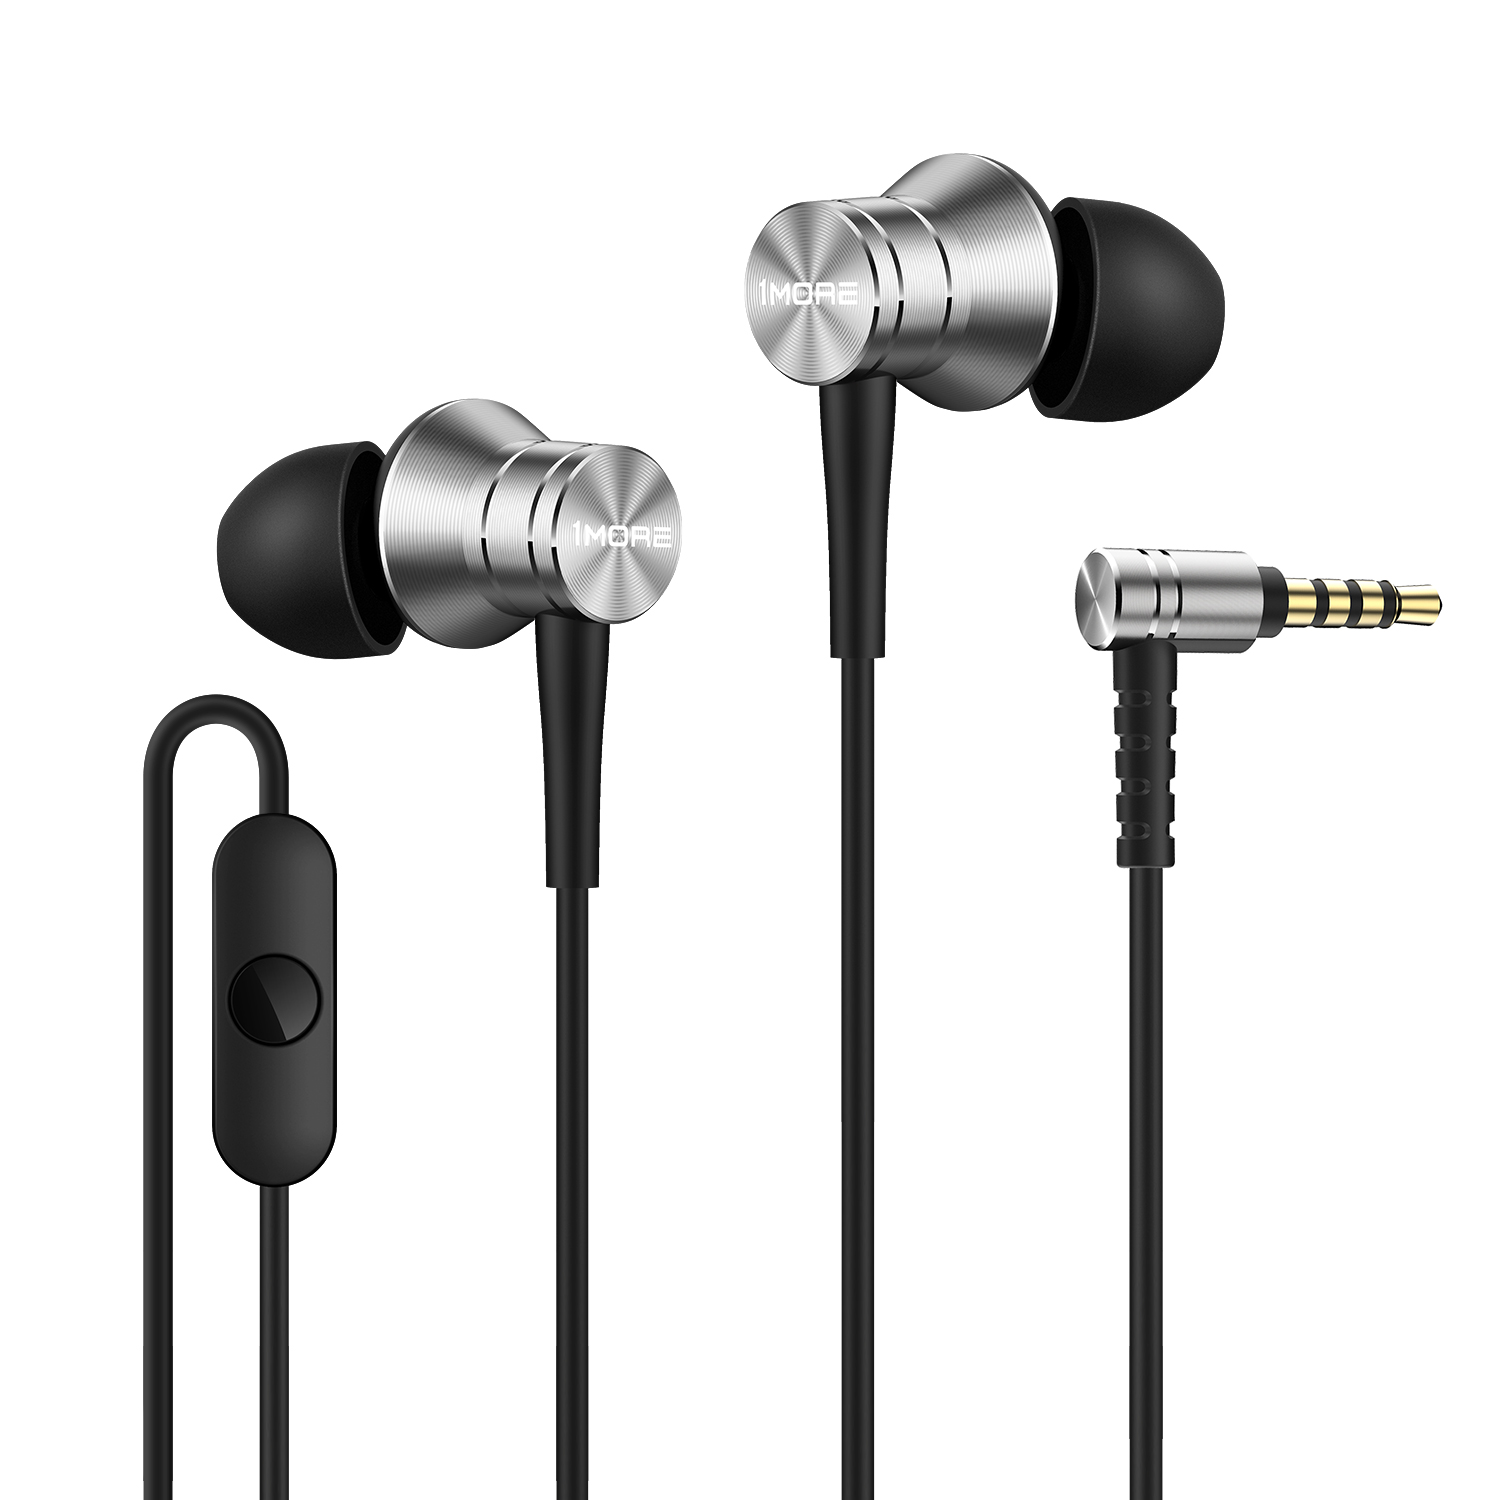 1MORE­ E1009 Piston Fit in-Ear Headphones earbuds earphones with Microphone Silver